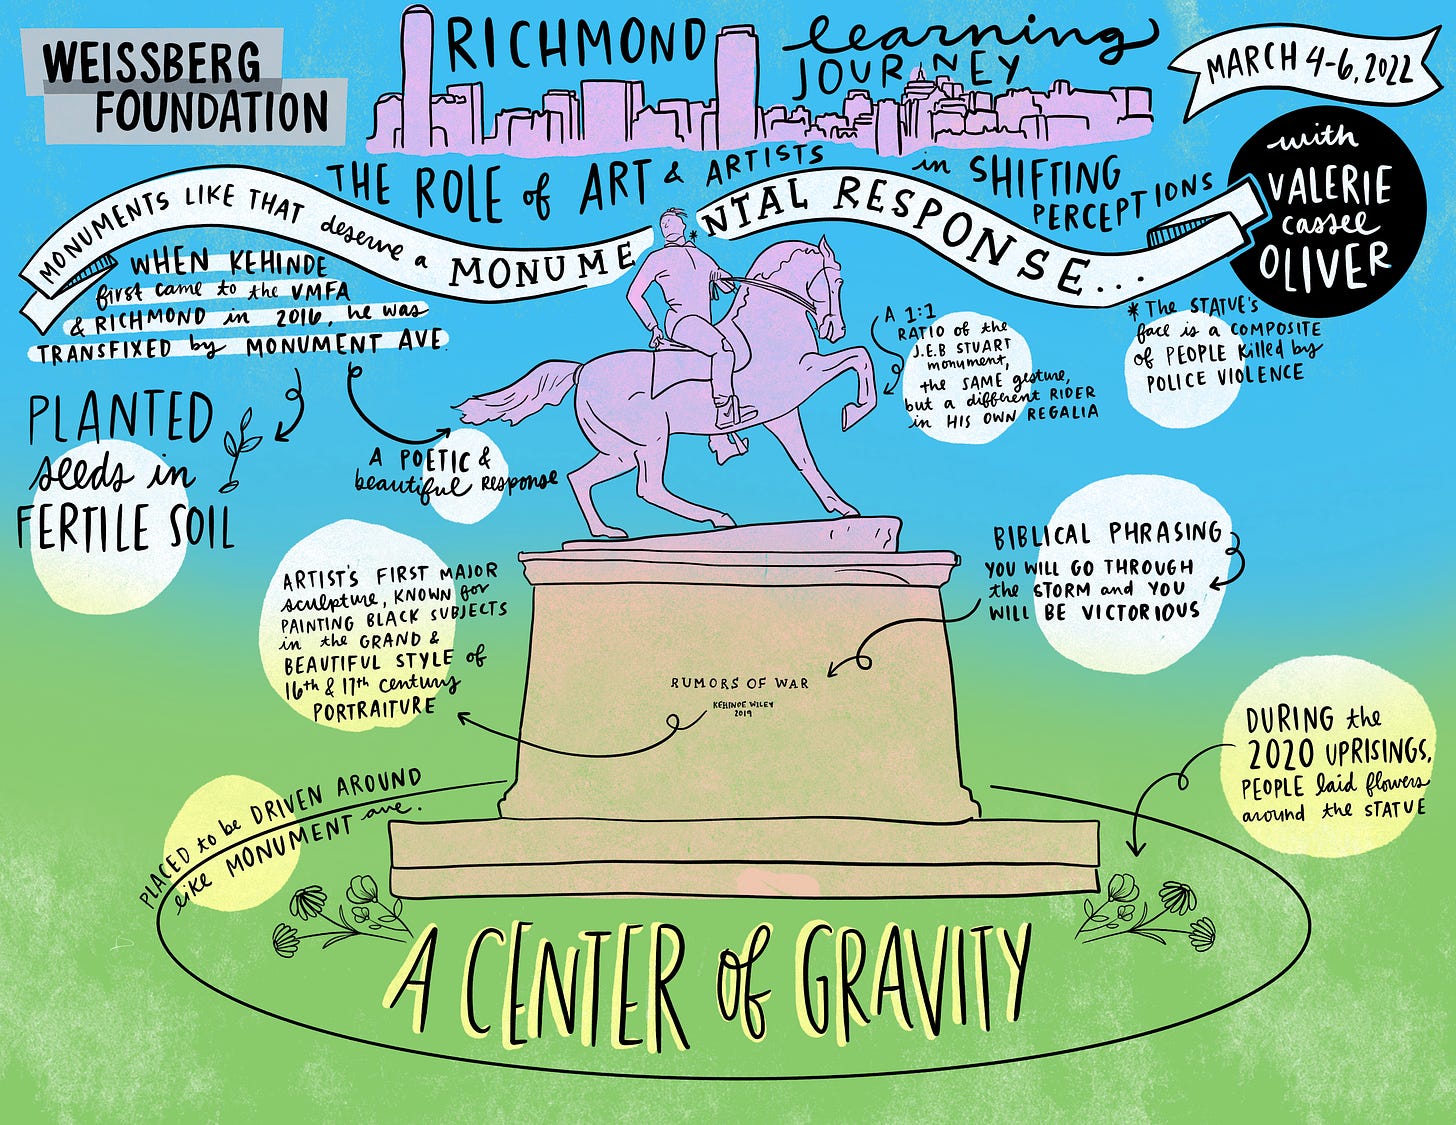 Graphic Recording of Richmond Learning Journey featuring Kehinde Wiley's RUMORS OF WAR statue which was created as a response to Richmond's Monument Avenue